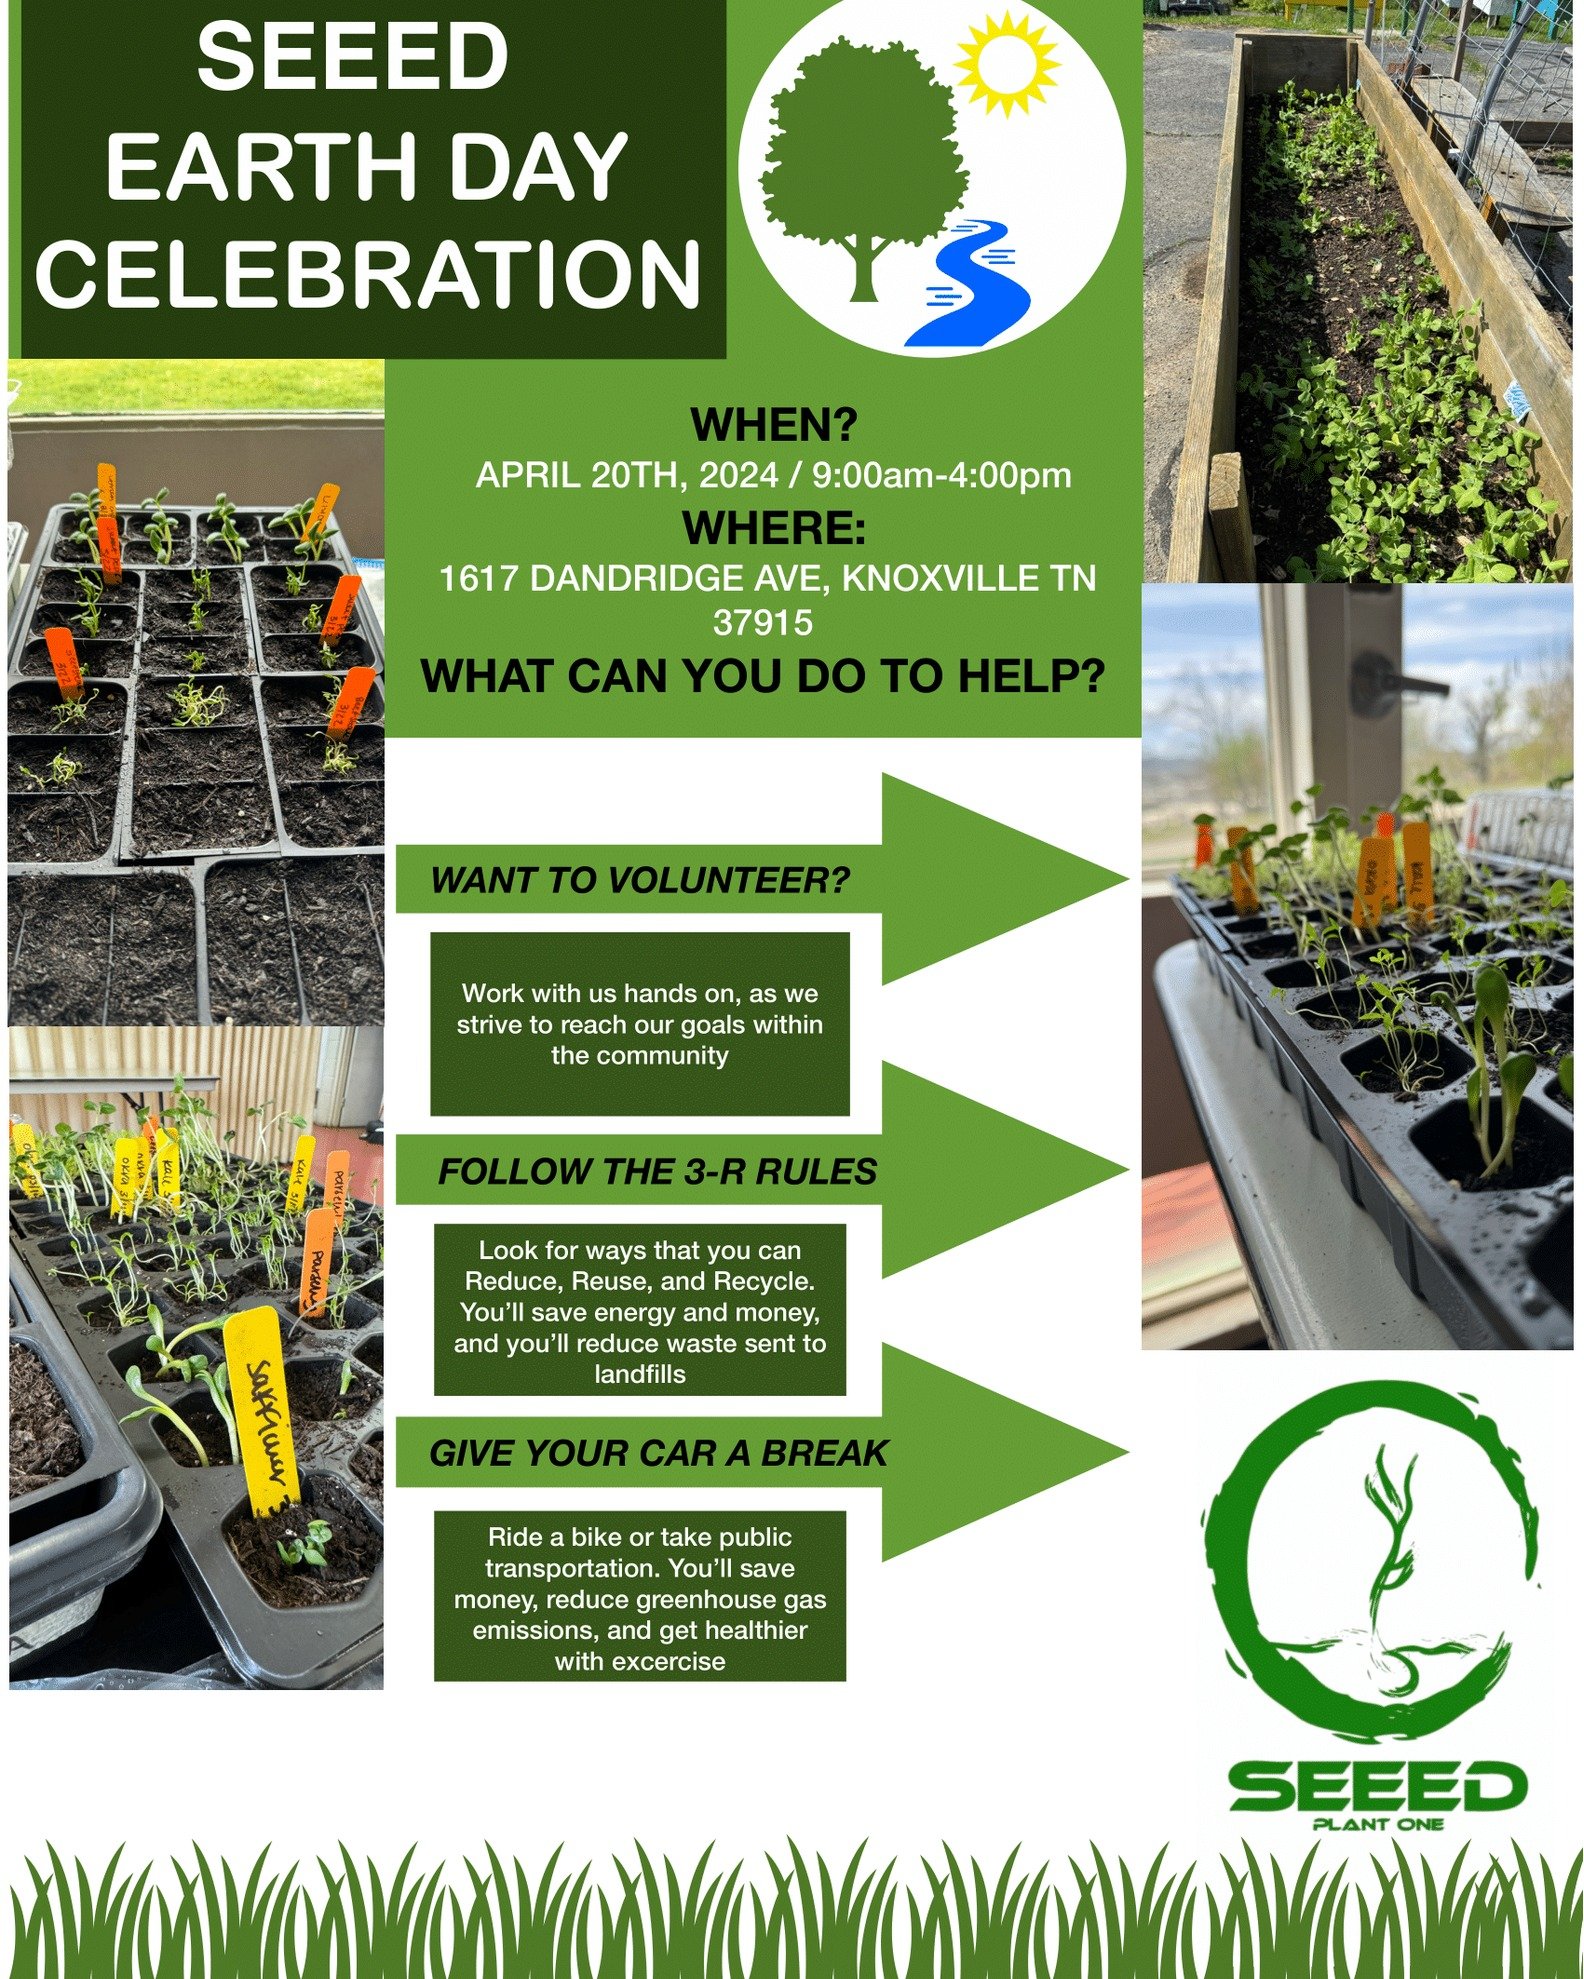 Join us for SEEED's Earth Day Celebration on April 20th! 🎉 From 9am to 4pm, enjoy entertainment, delicious food, and fun activities as we come together to celebrate our planet! We'll be planting and gardening throughout the day and would love some e